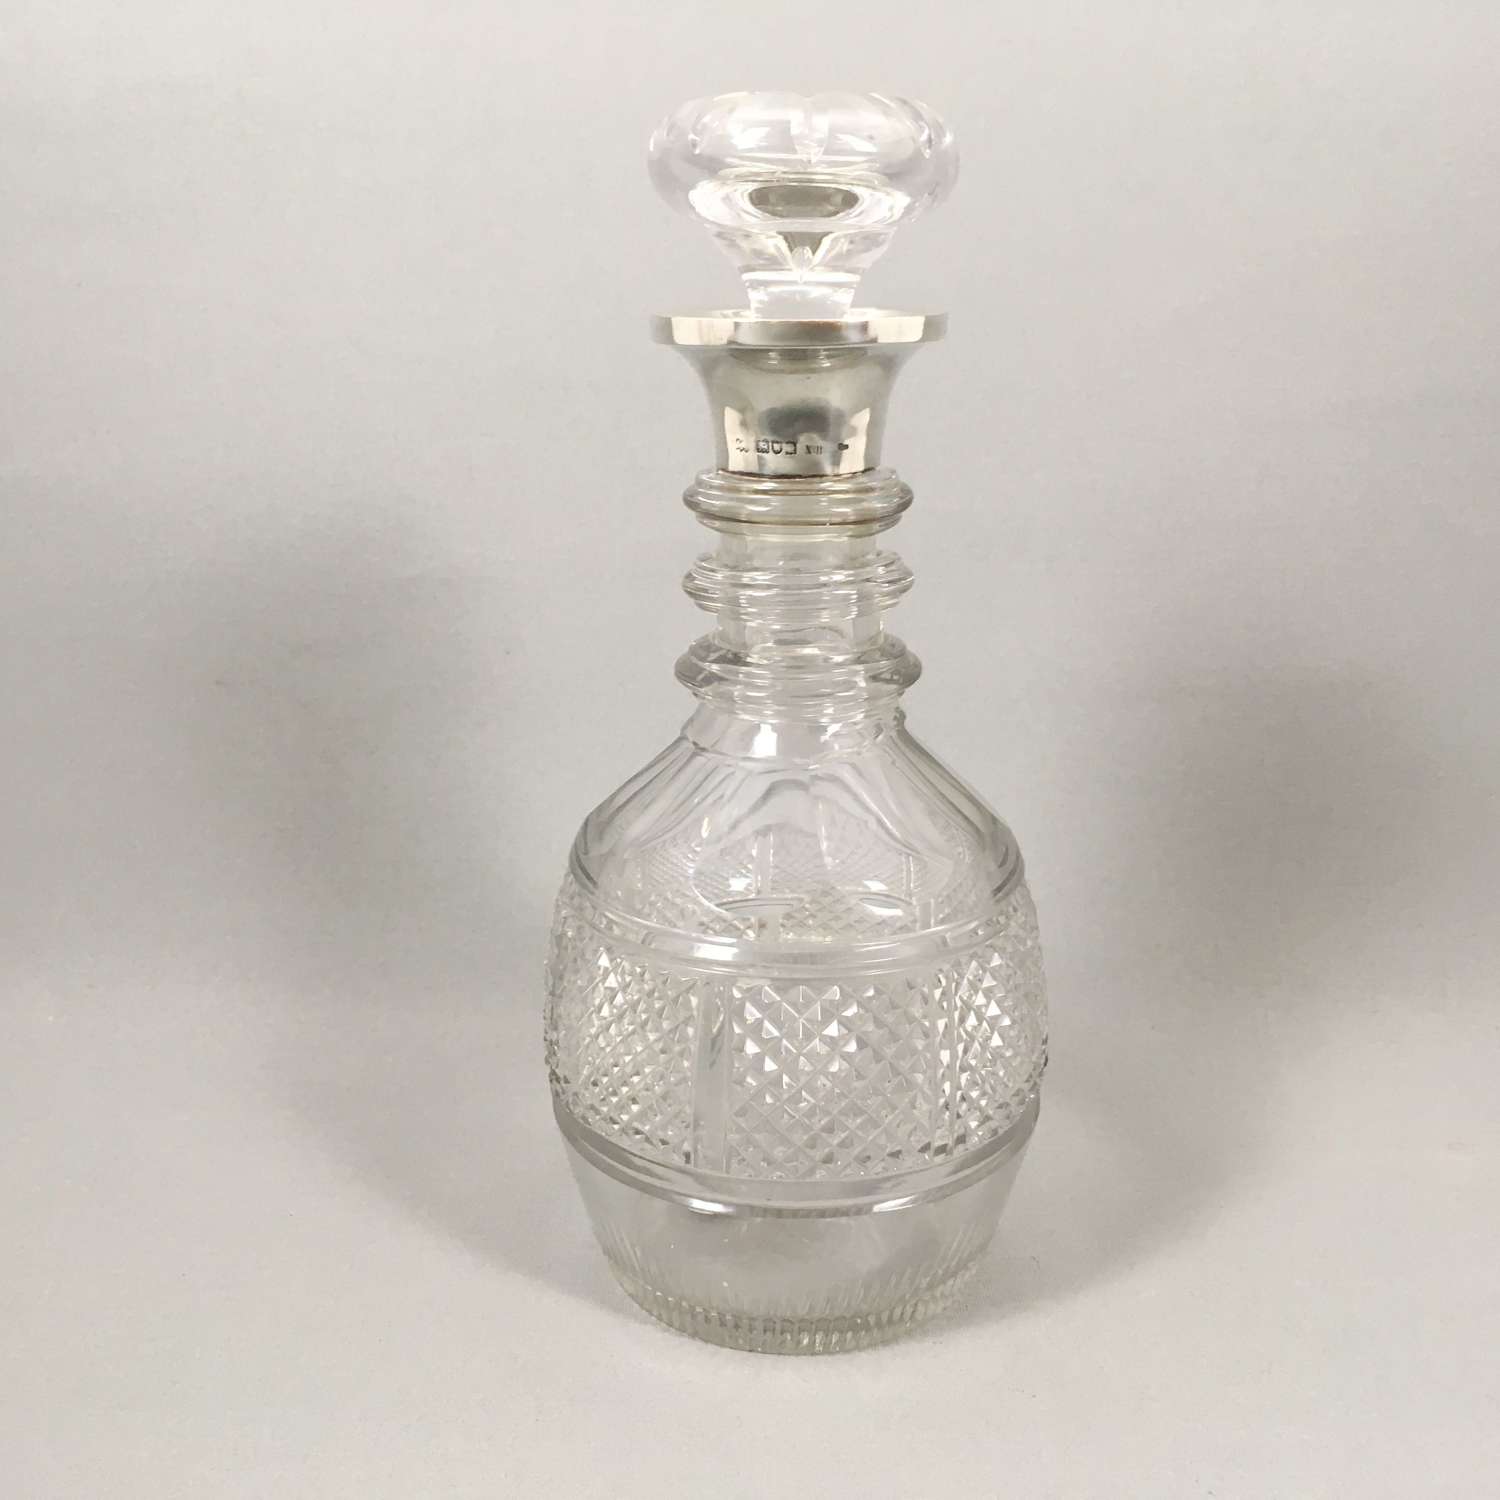 Antique cut glass silver rimmed Decanter. W8498